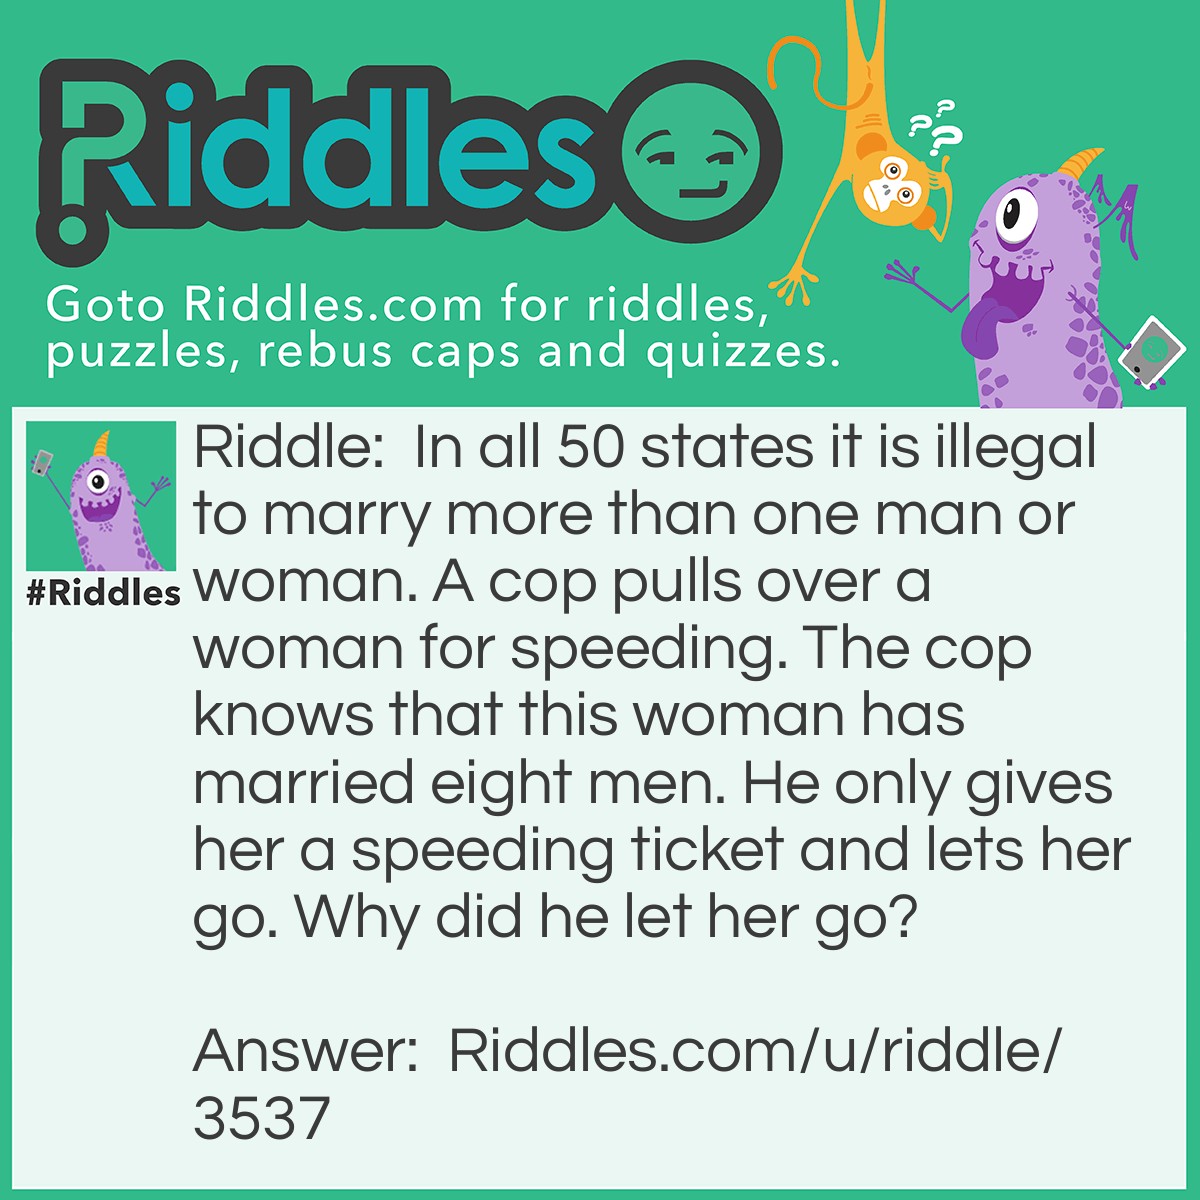 Riddle: In all 50 states it is illegal to marry more than one man or woman. A cop pulls over a woman for speeding. The cop knows that this woman has married eight men. He only gives her a speeding ticket and lets her go. Why did he let her go? Answer: The woman was a priest.